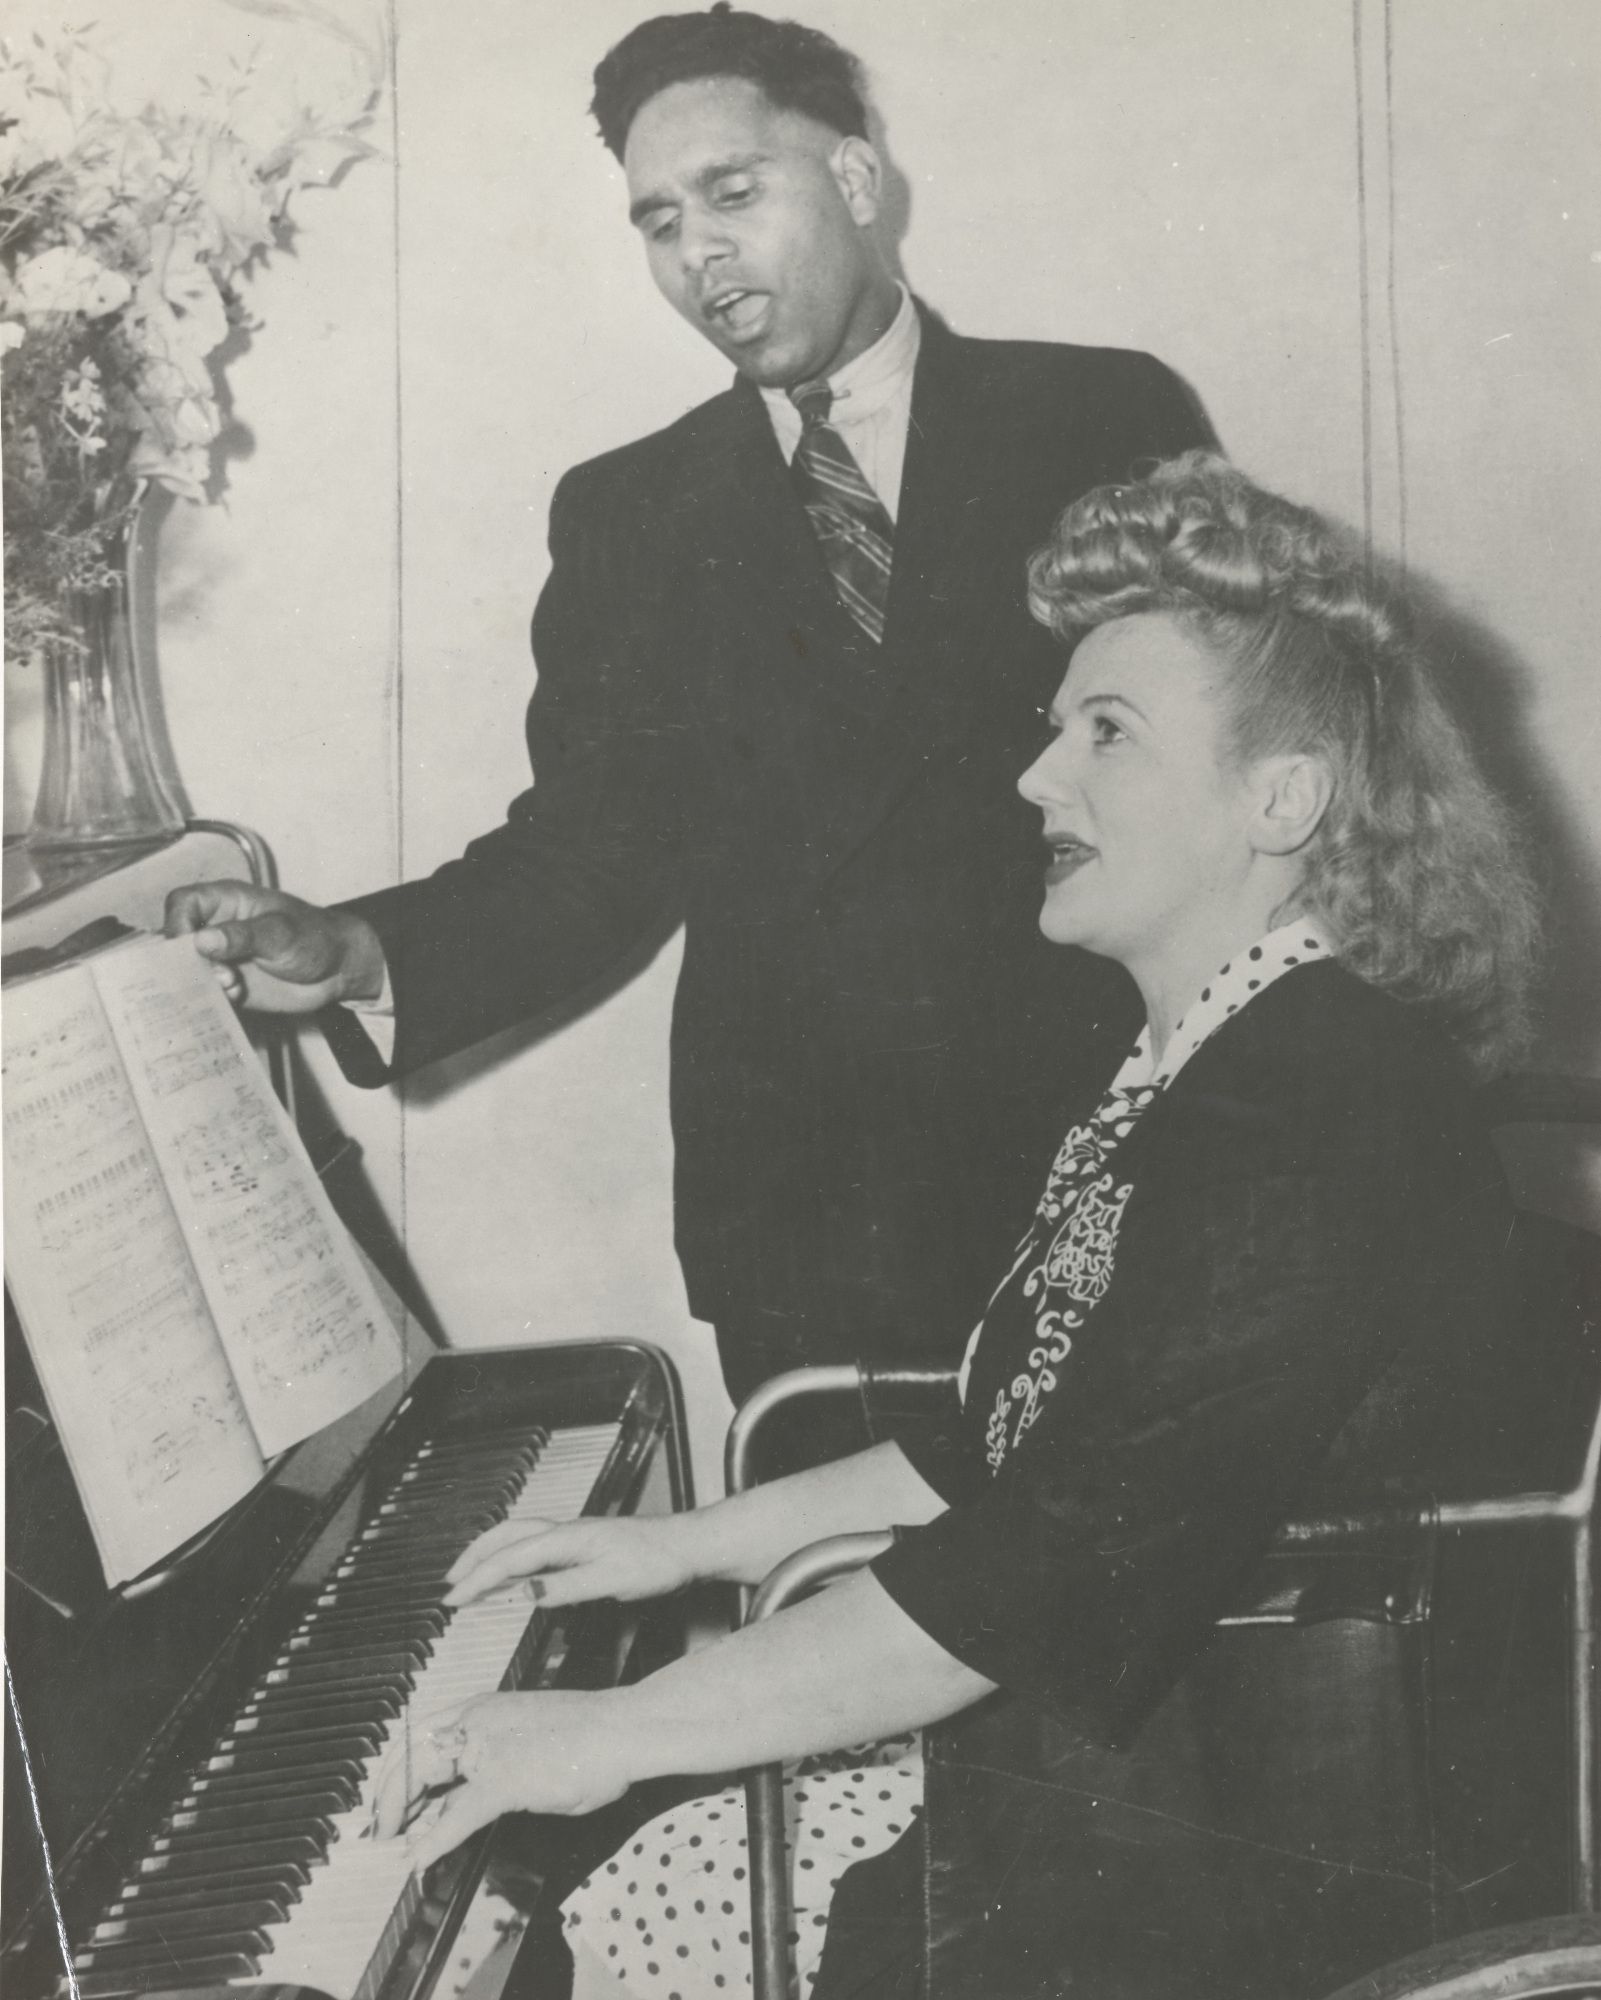 Harold Blair sings at a piano played by Marjorie Lawrence